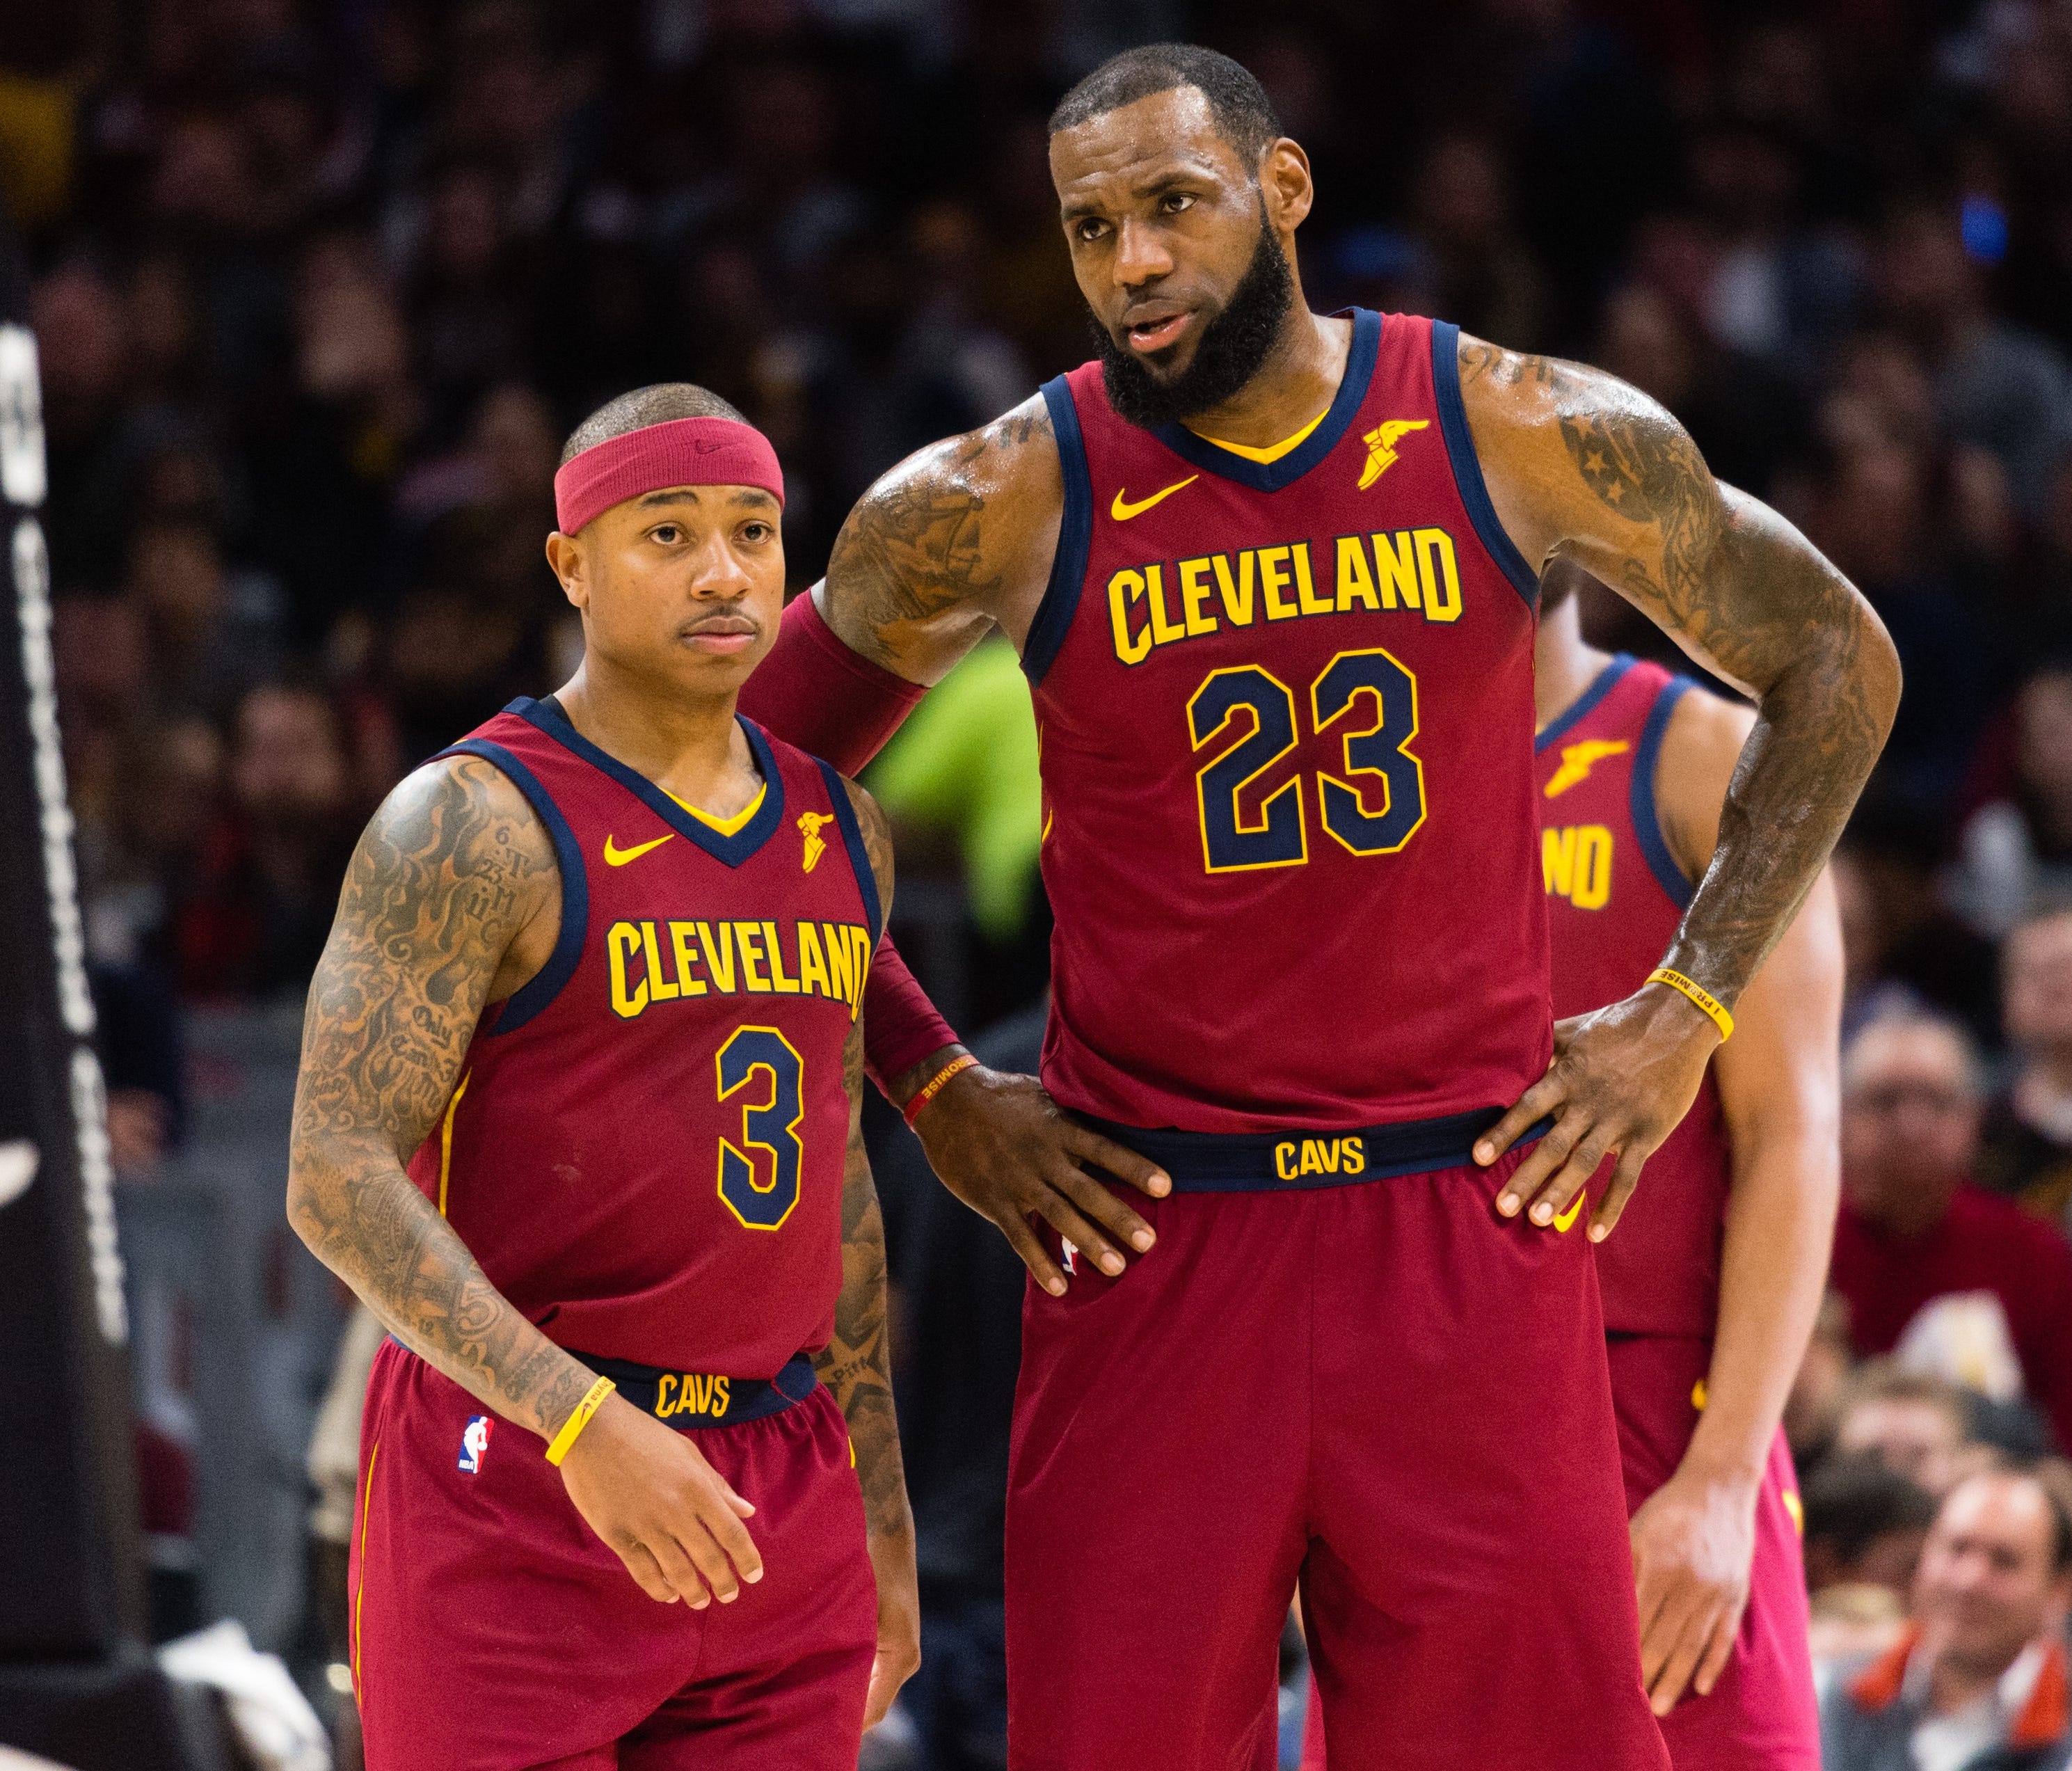 Isaiah Thomas' time with LeBron James in Cleveland lasted just 15 games